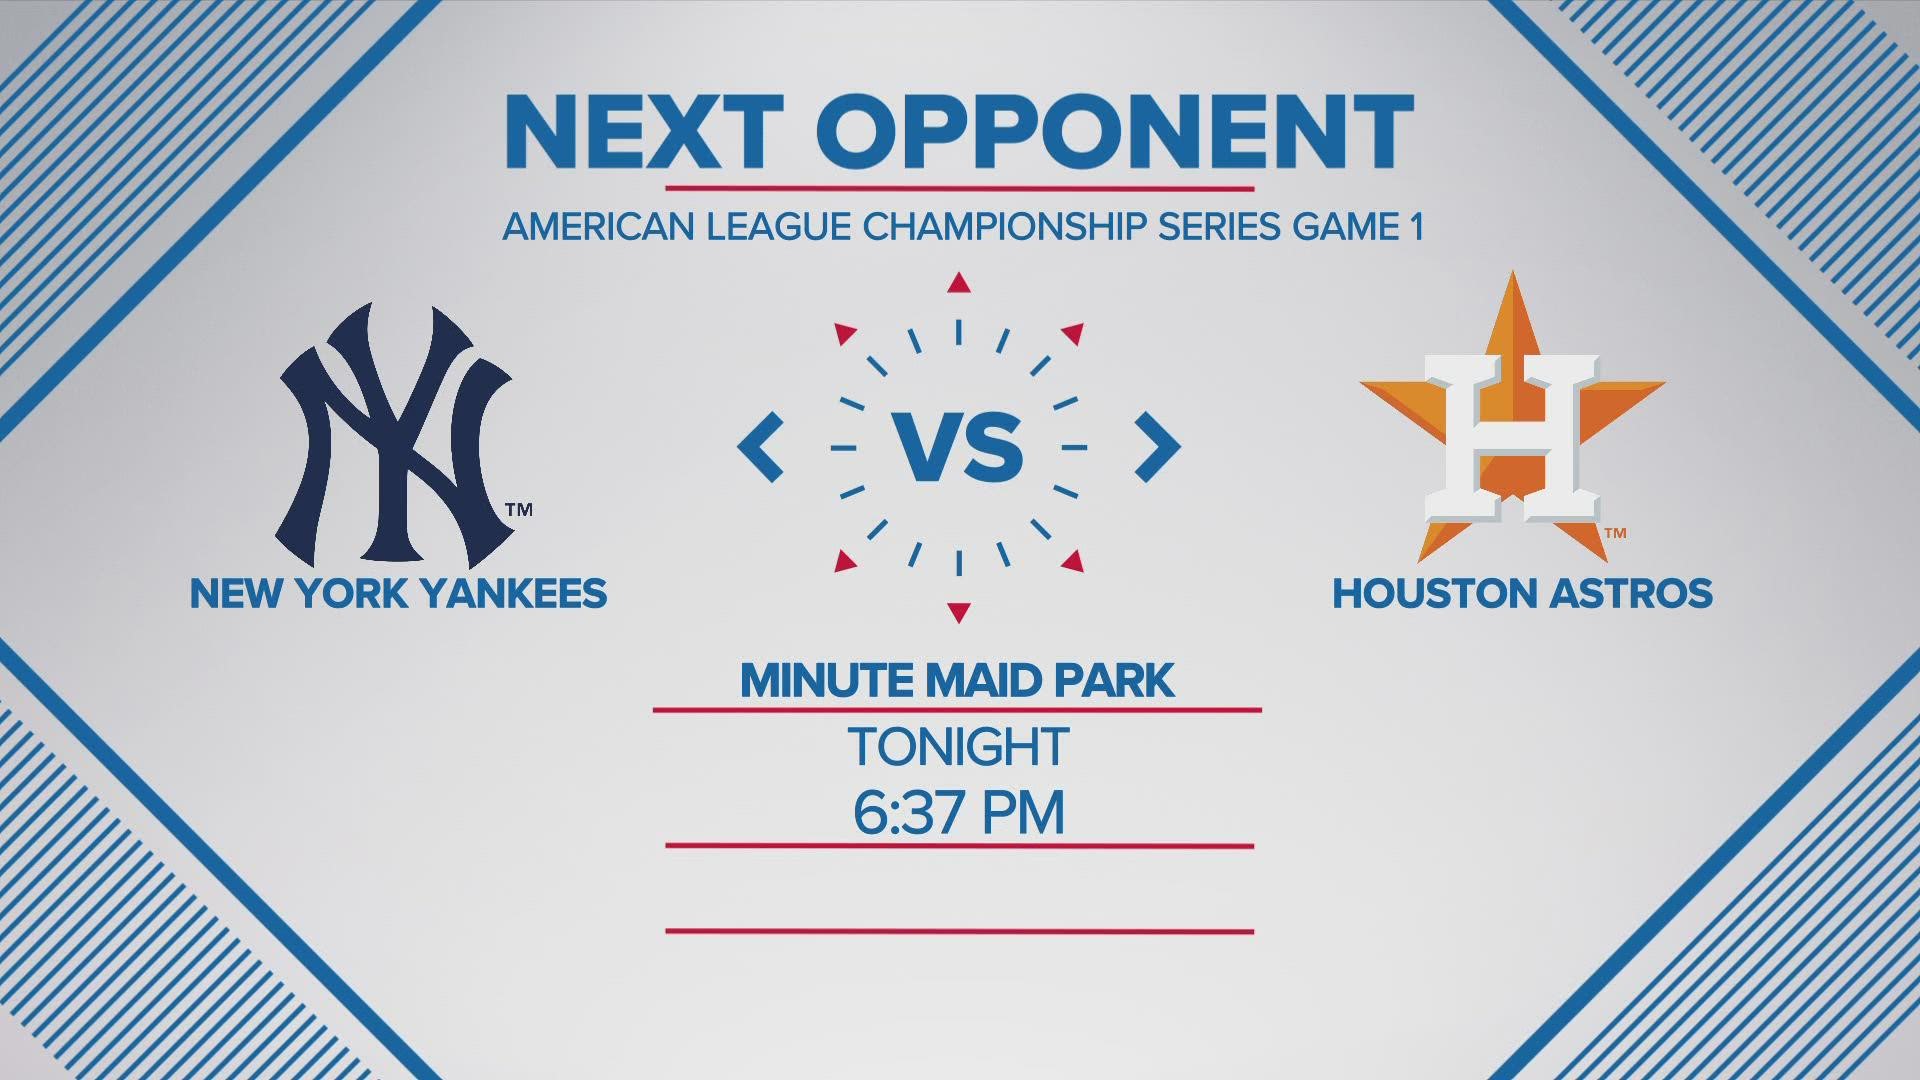 Houston defeated the NY Yankees in both the 2017 and 2019 seasons.